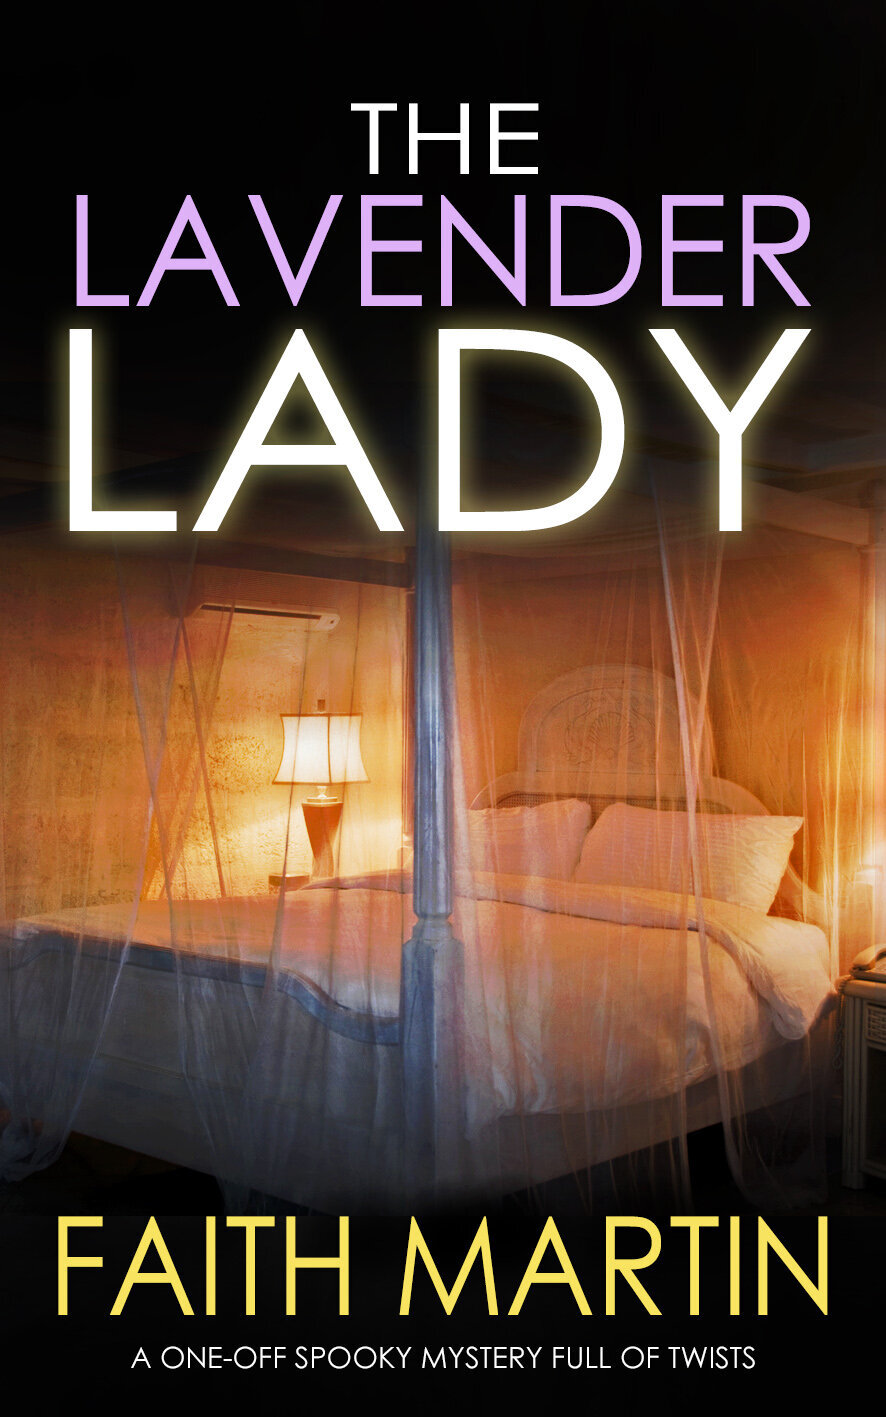 THE+LAVENDER+LADY+PUBLISH+cover.jpg